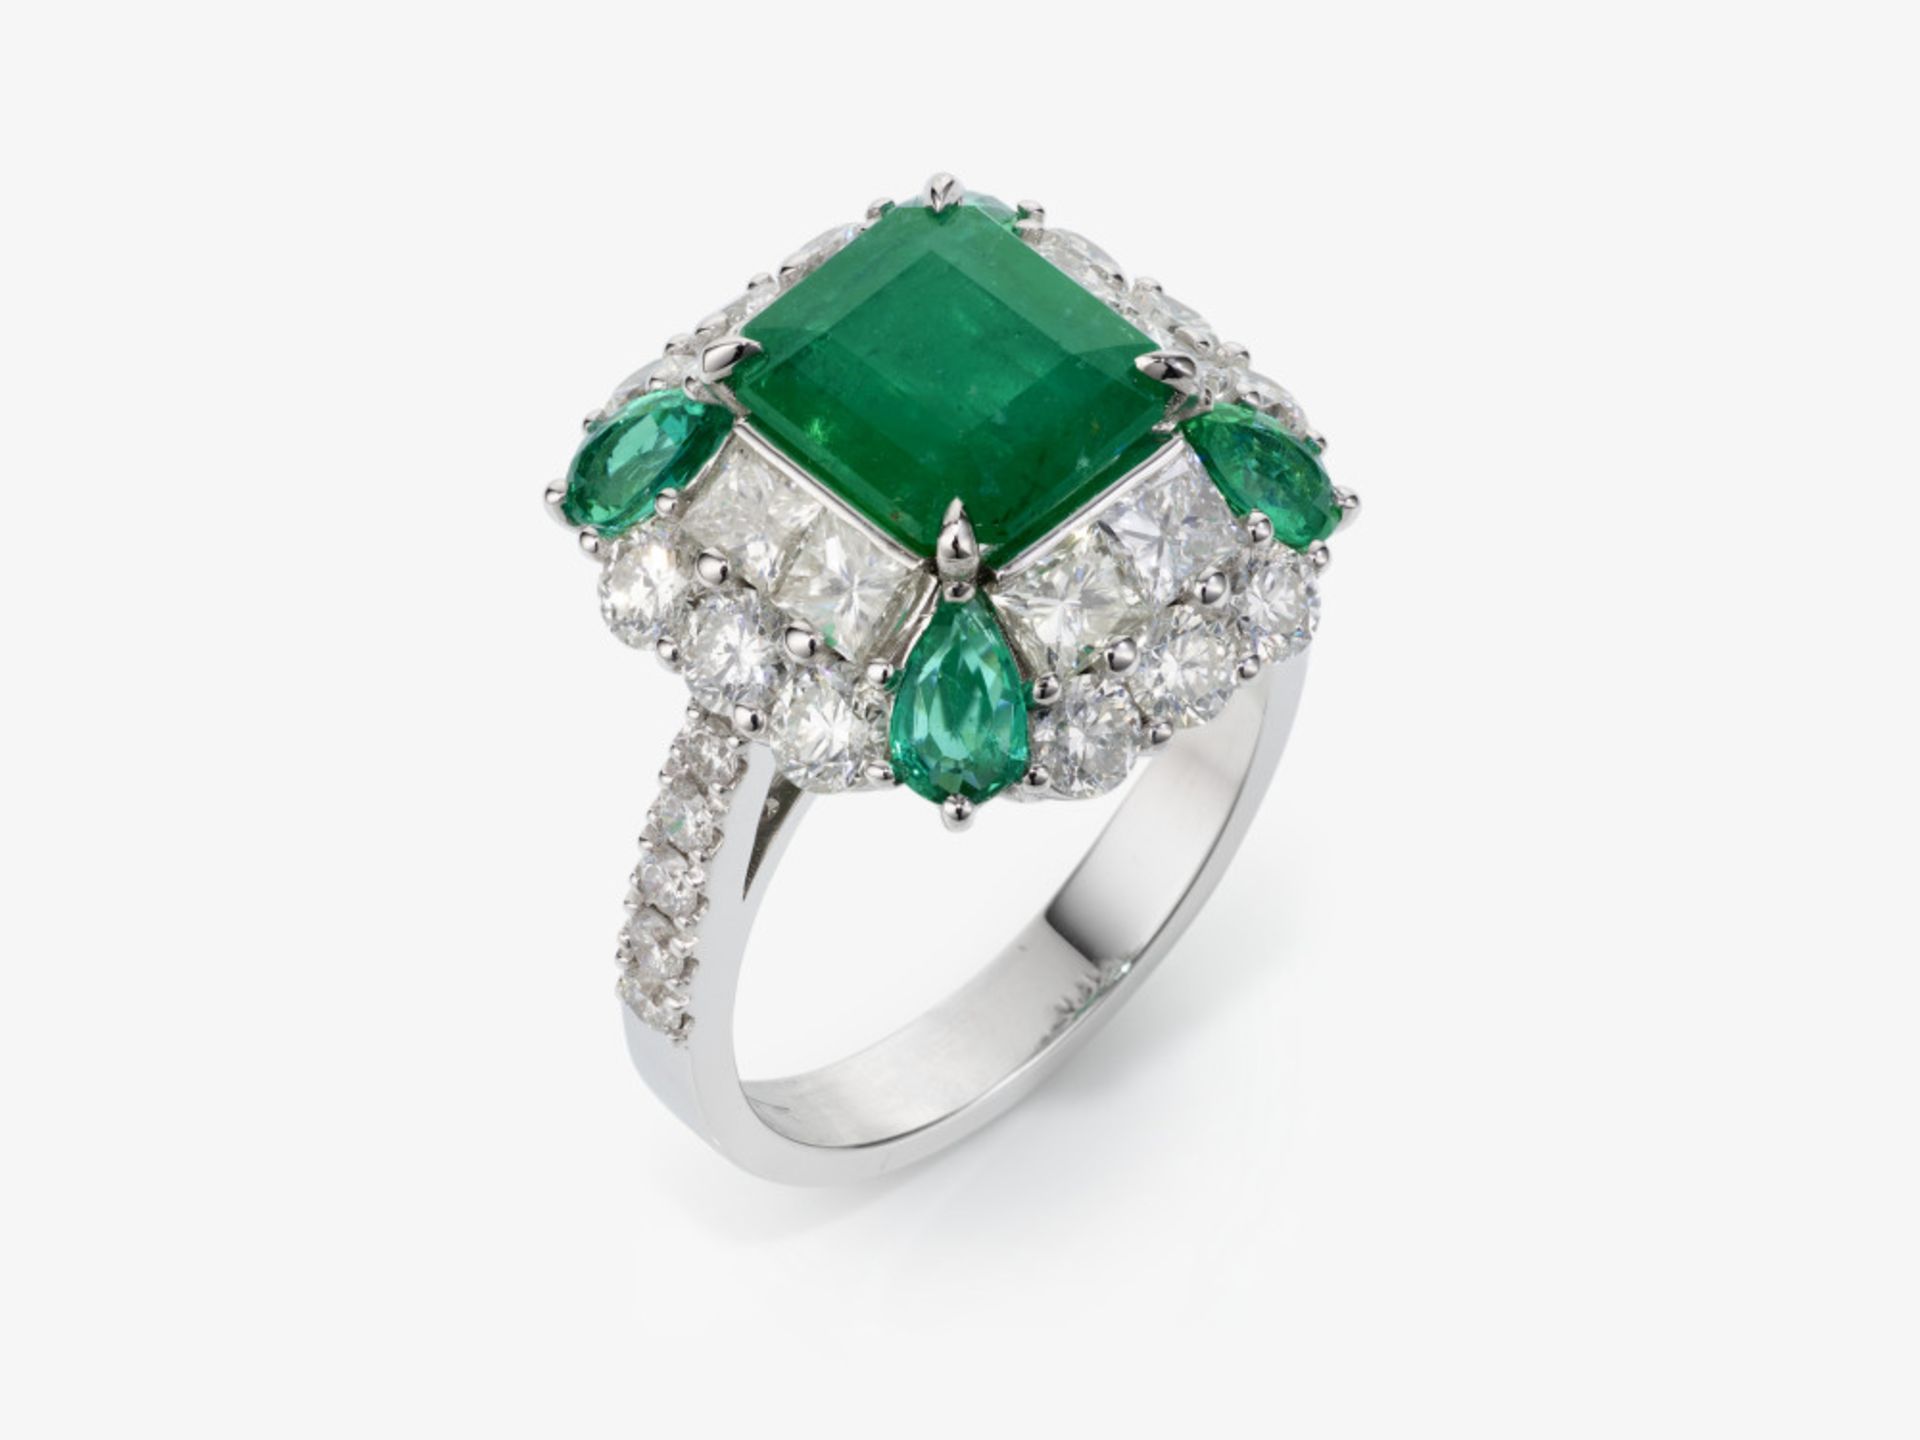 Ring with an emerald and diamonds